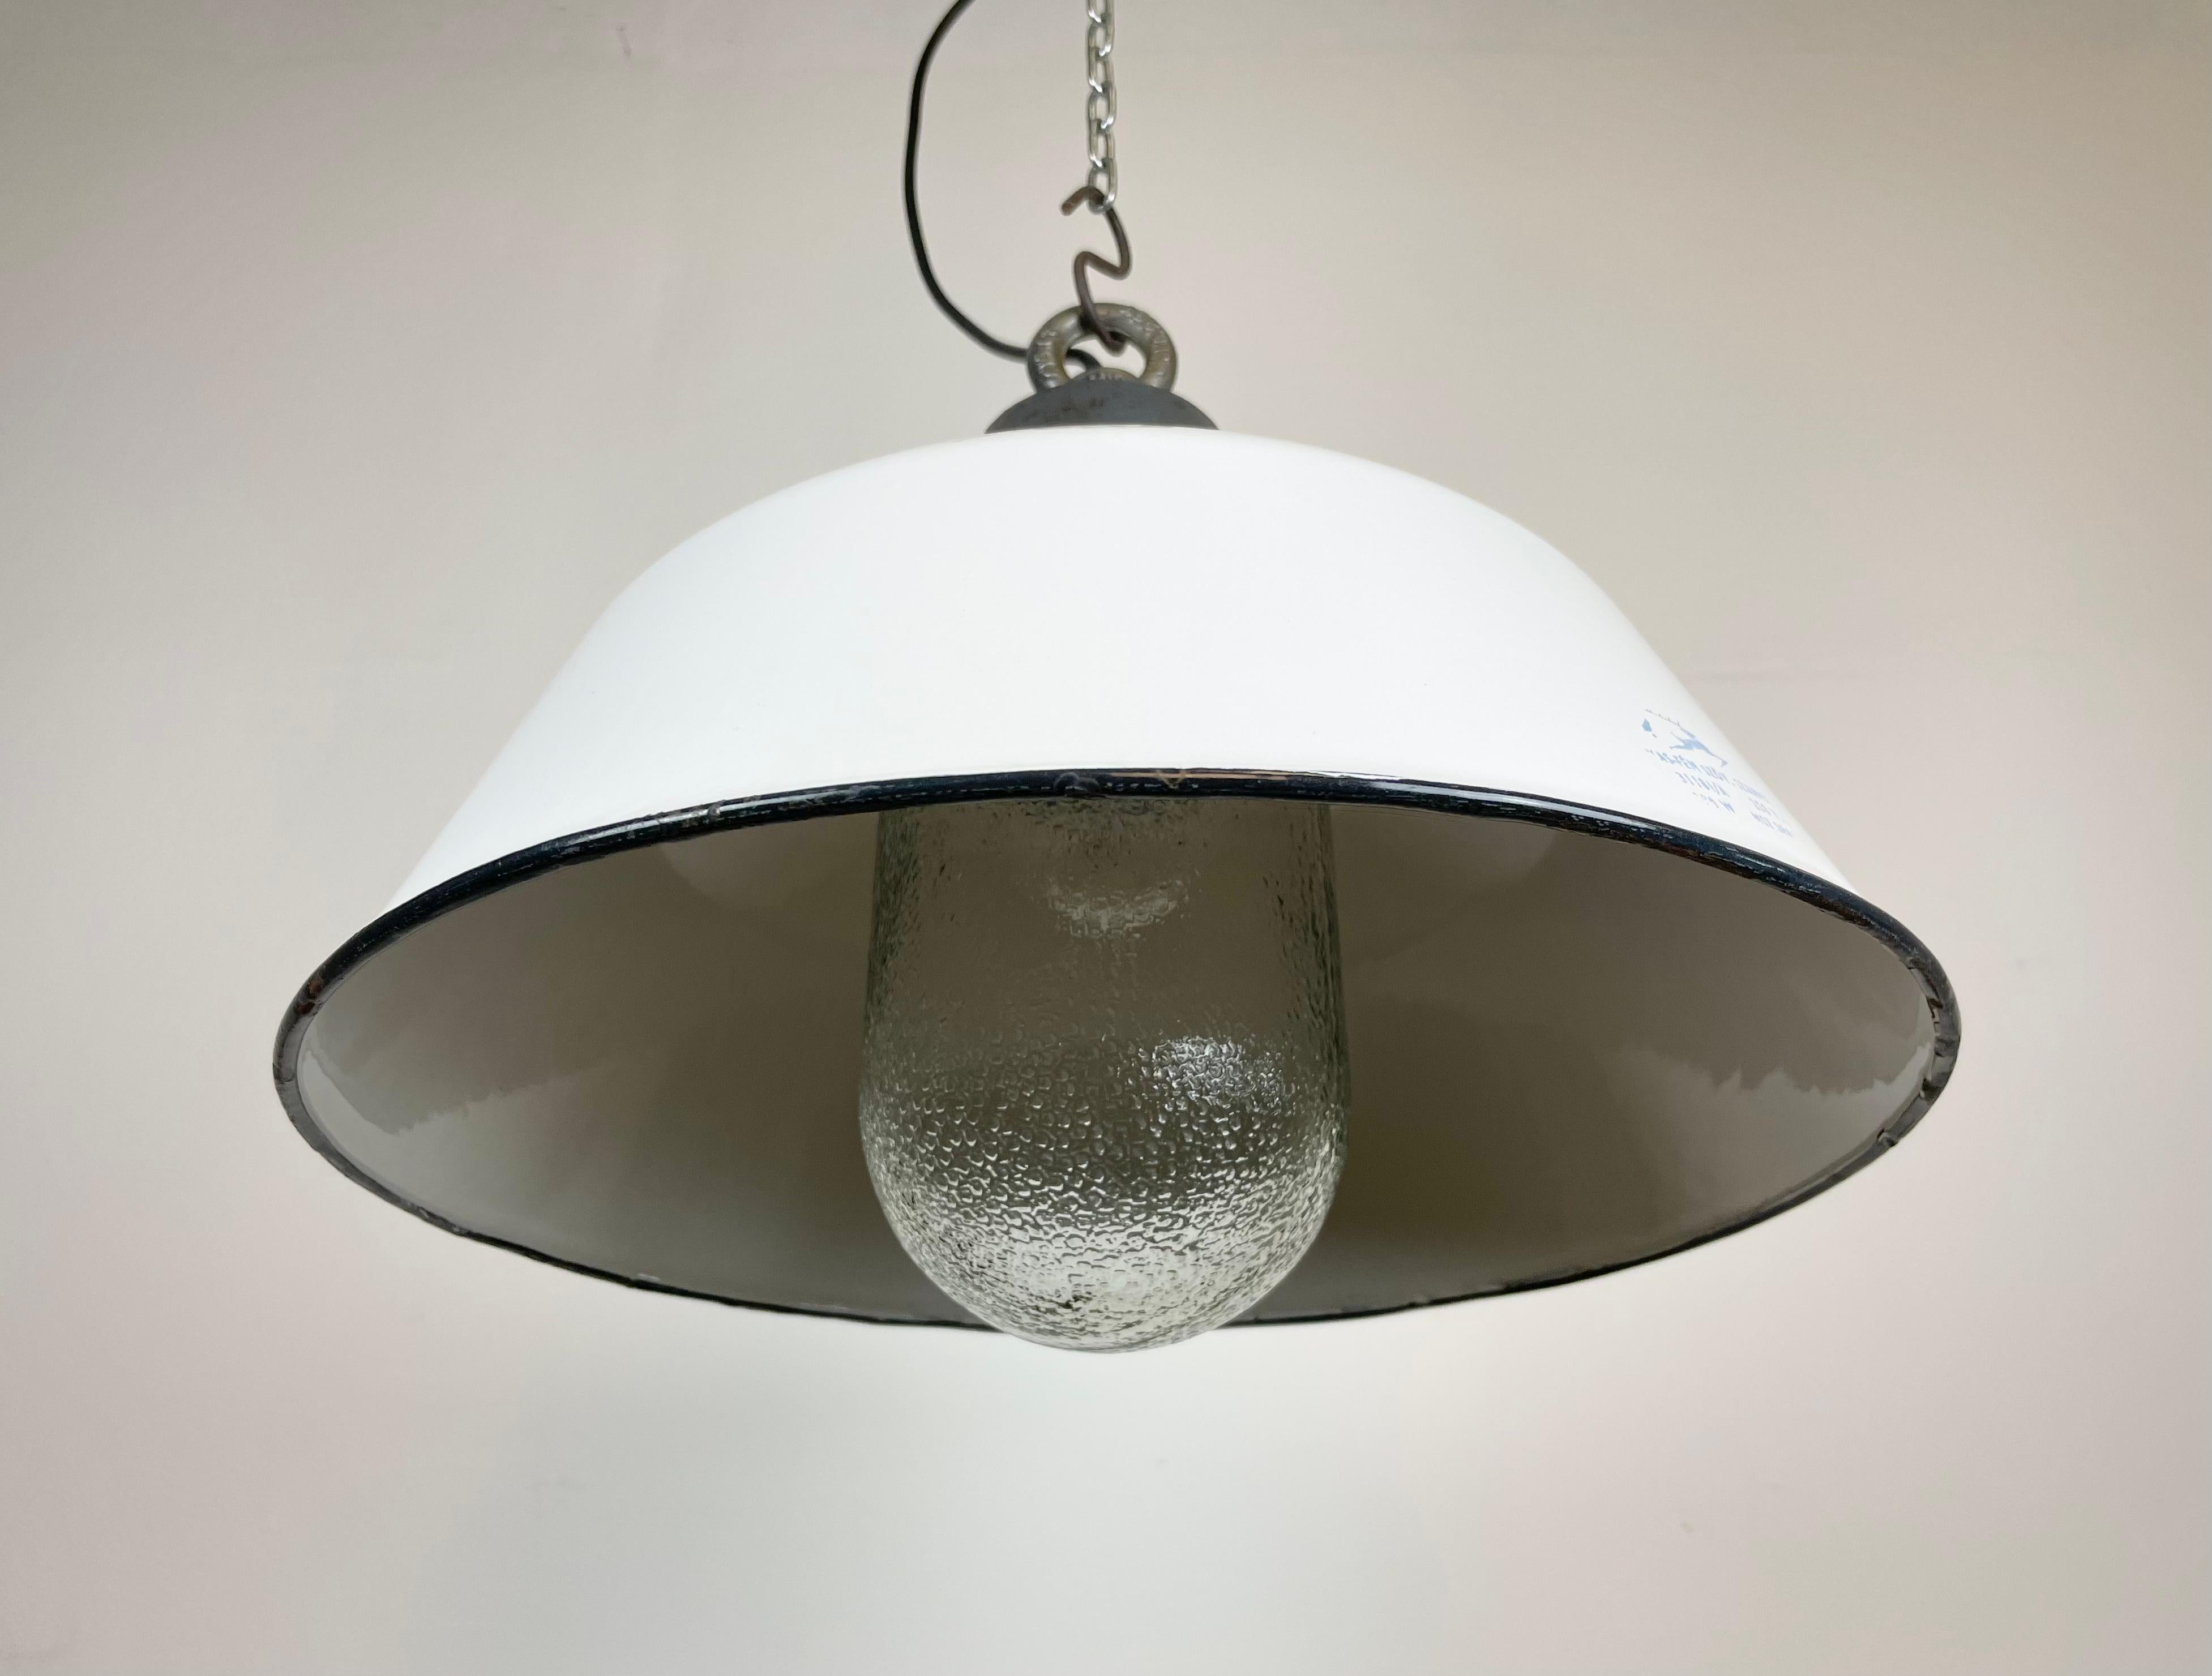 White Enamel and Cast Iron Industrial Pendant Light with Glass Cover, 1960s In Good Condition For Sale In Kojetice, CZ